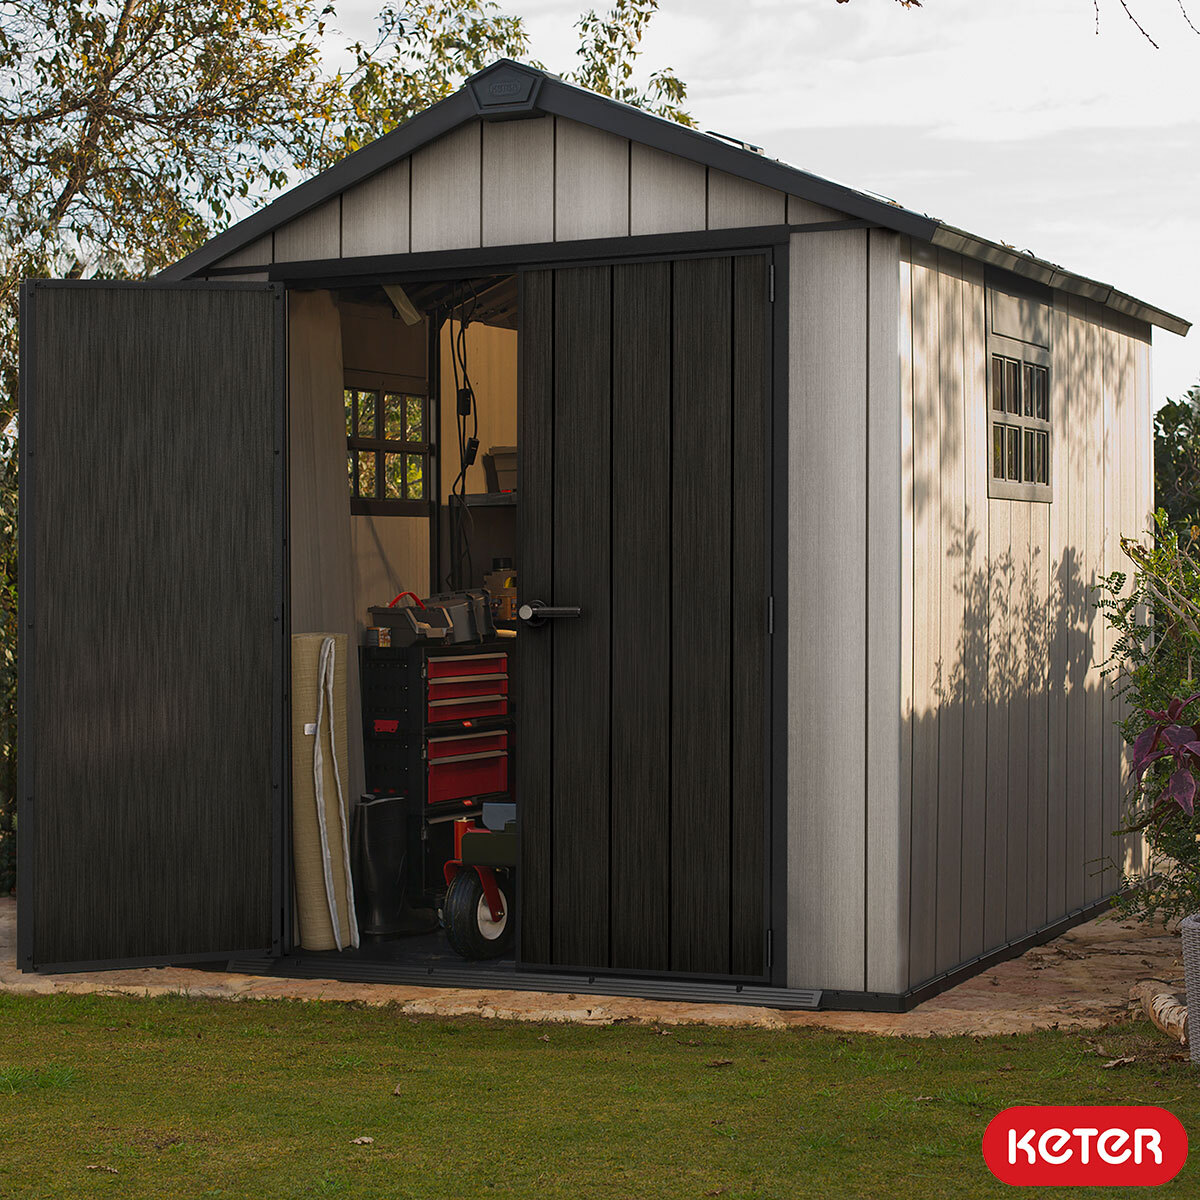 Keter Oakland 7ft 6" x 11ft (2.3 x 3.4m) Storage Shed